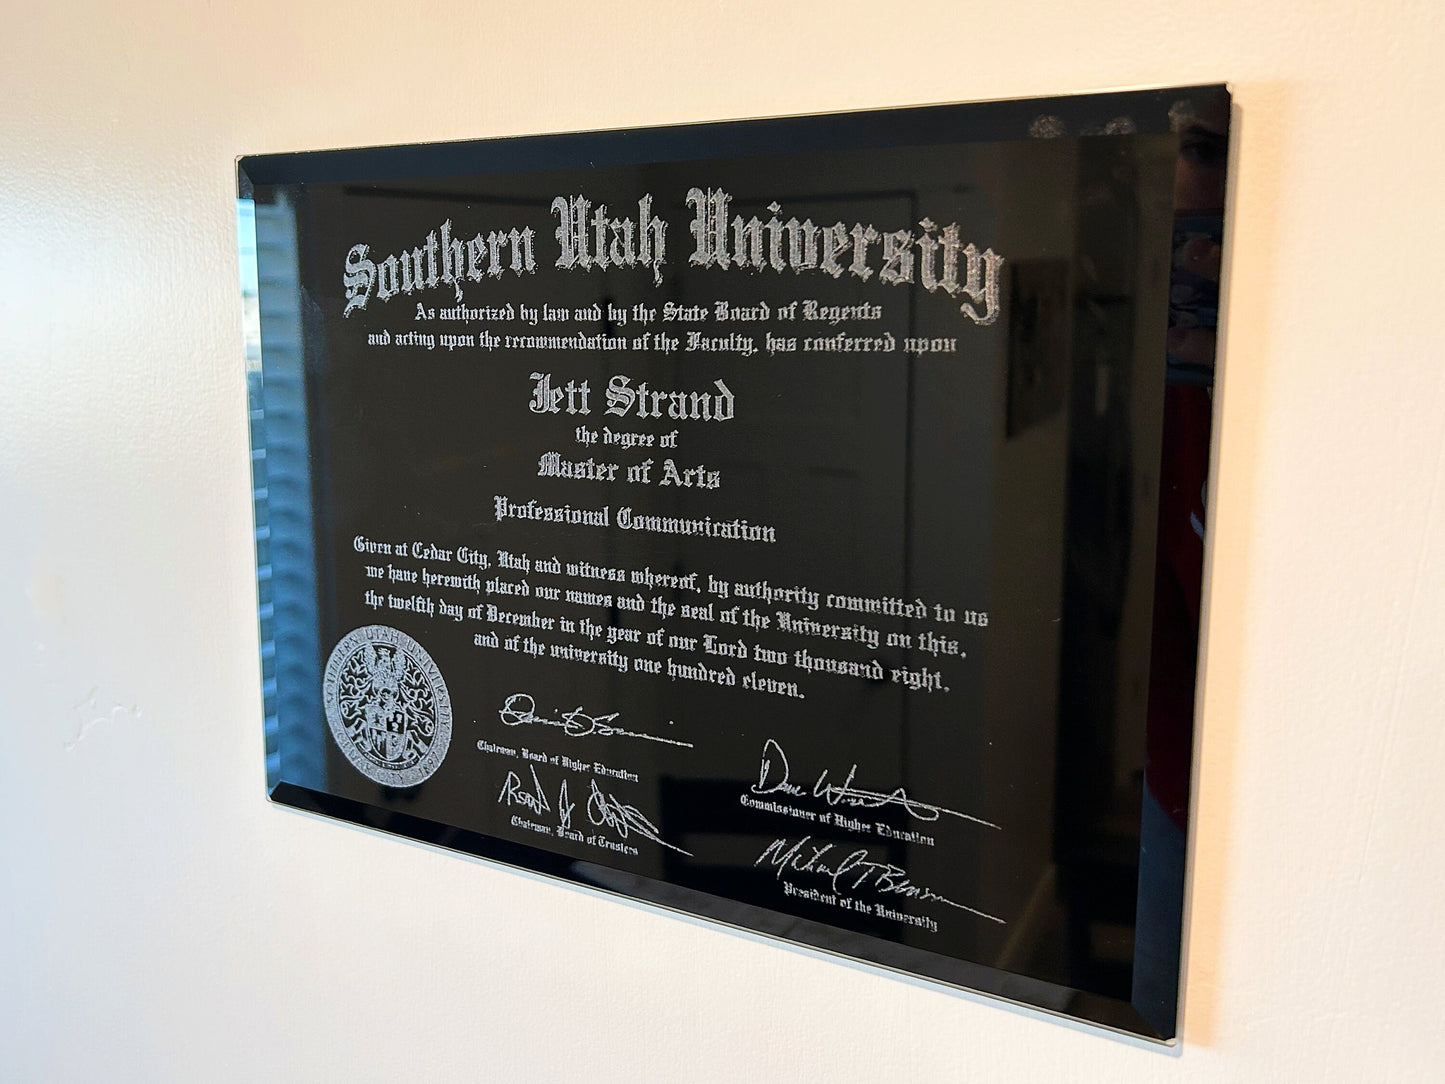 Black Glass Diploma Plaque, side view